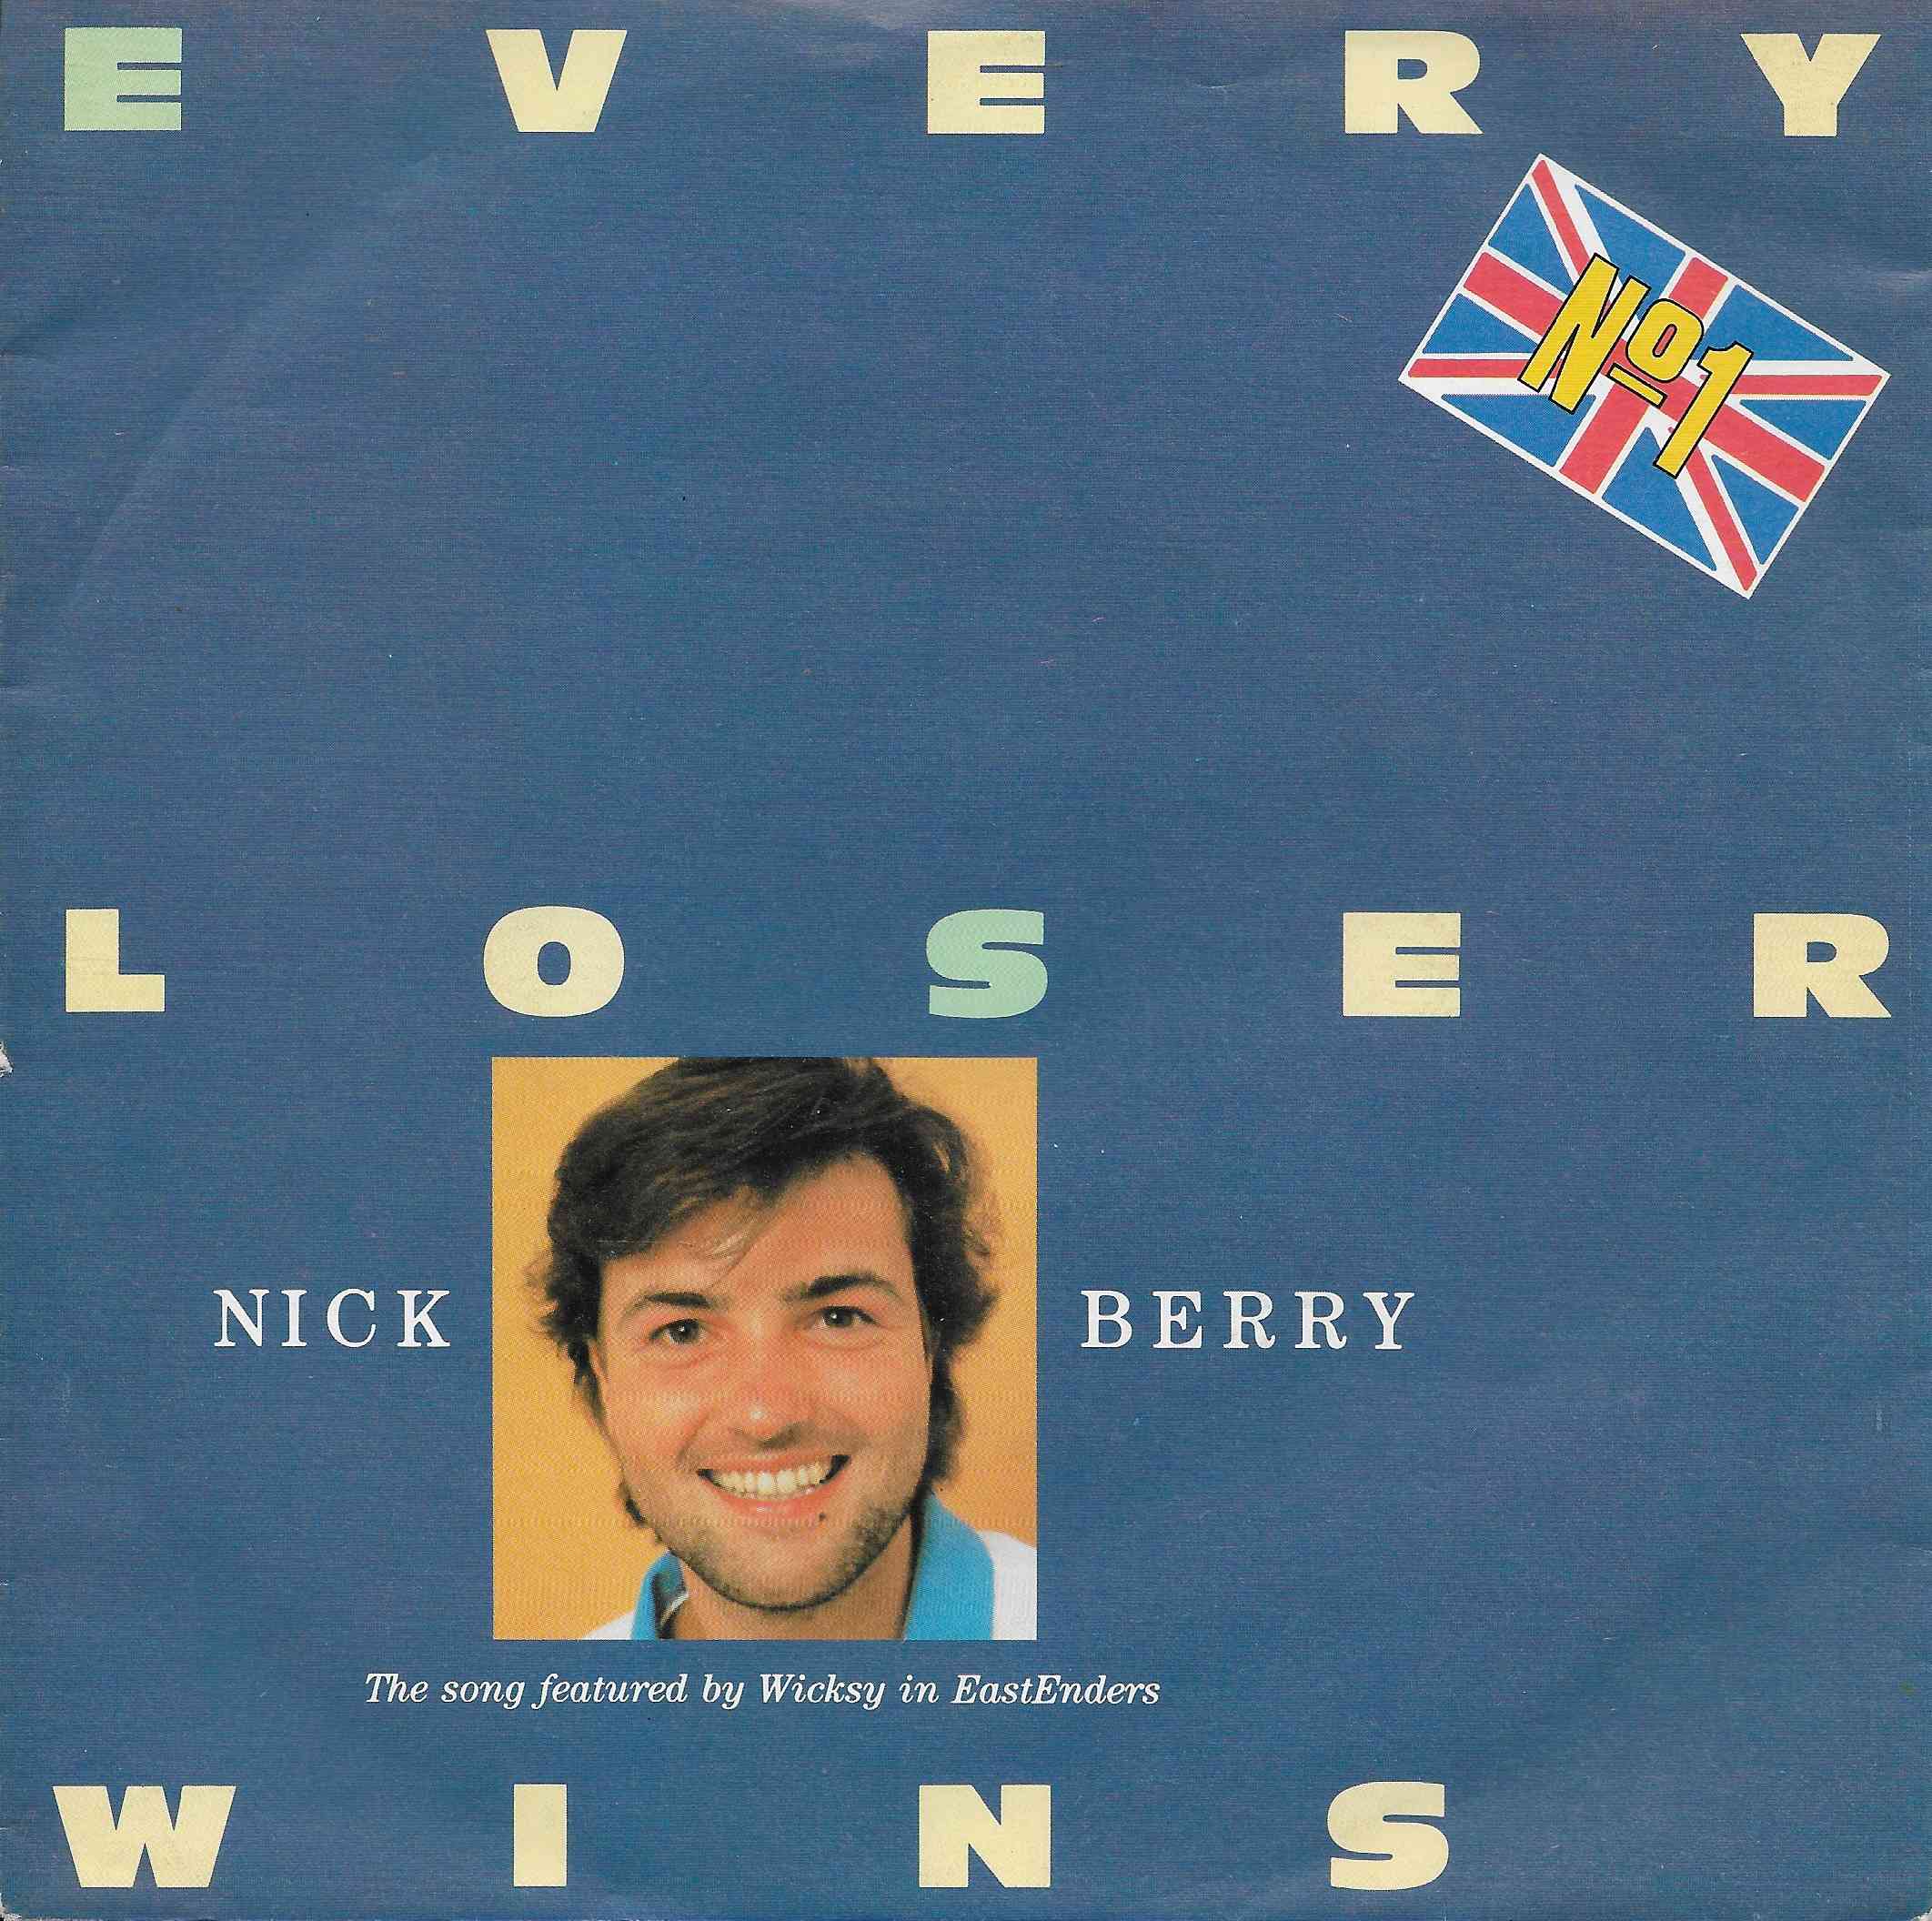 Picture of INT 113.011 Every loser wins by artist Simon May / Stewart and Bradley James from the BBC singles - Records and Tapes library